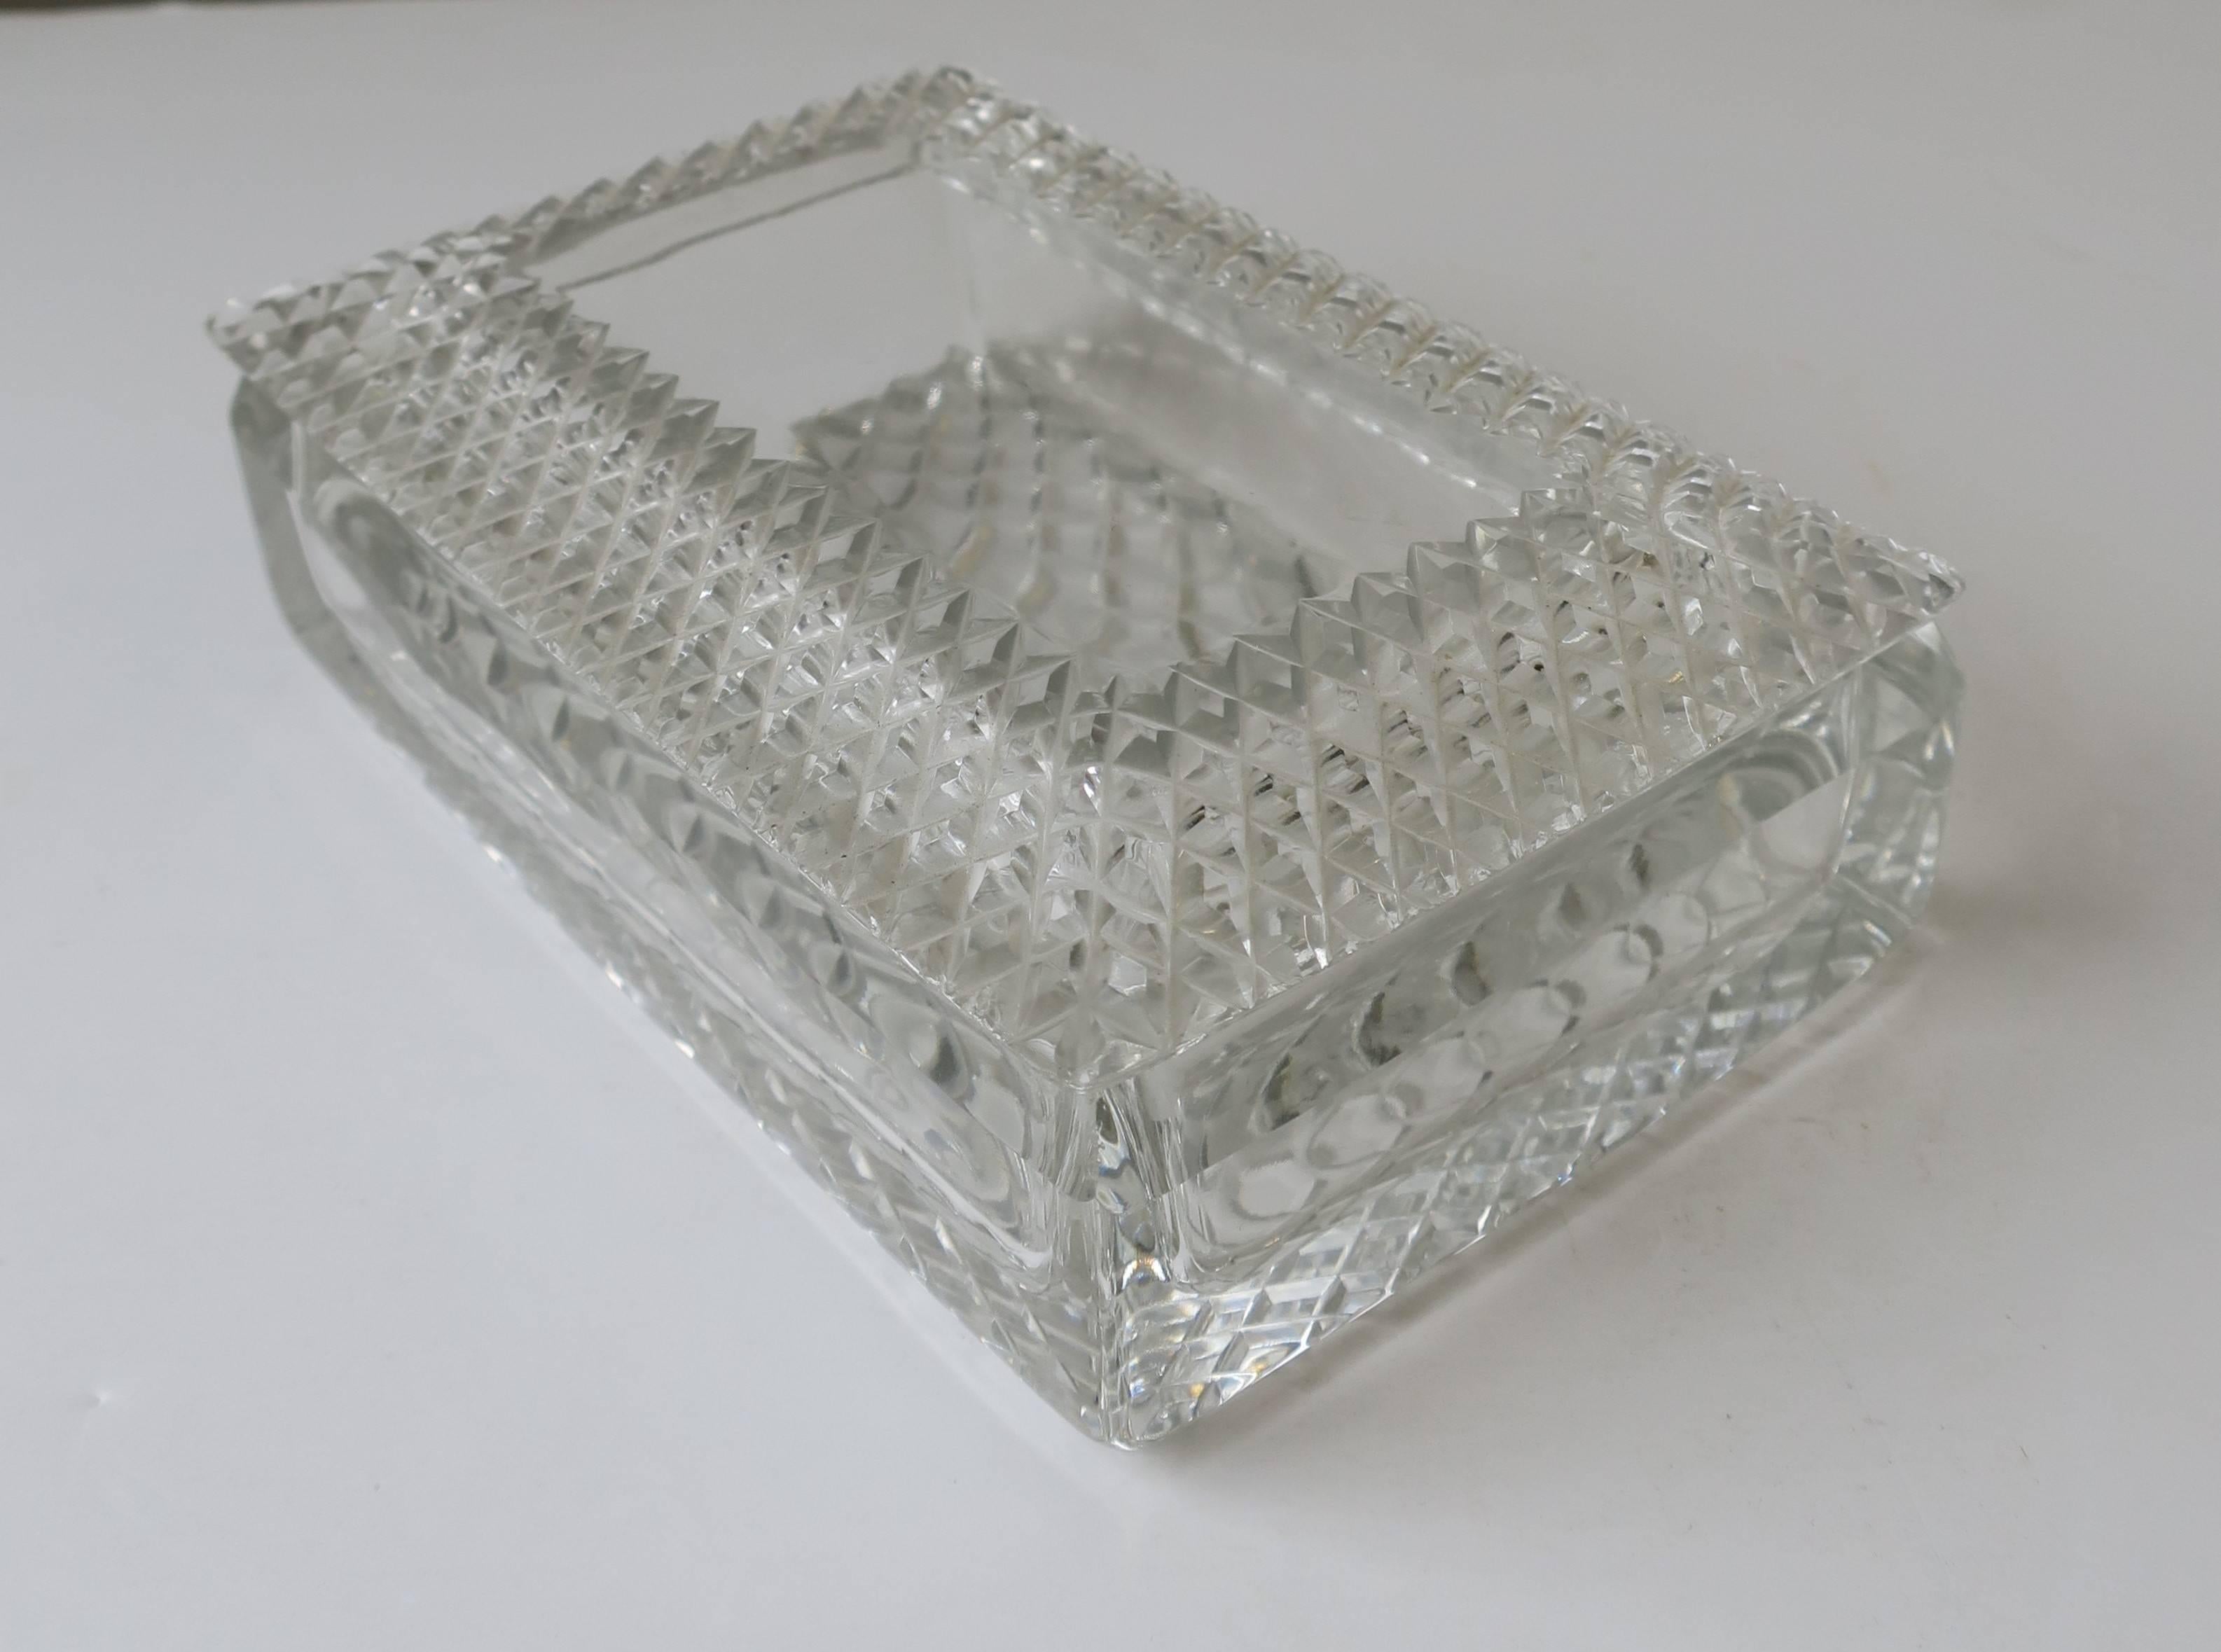 A beautiful vintage rectangular crystal jewelry or vanity box with a cut glass diamond quilted design pattern, circa Mid-20th Century. 

  